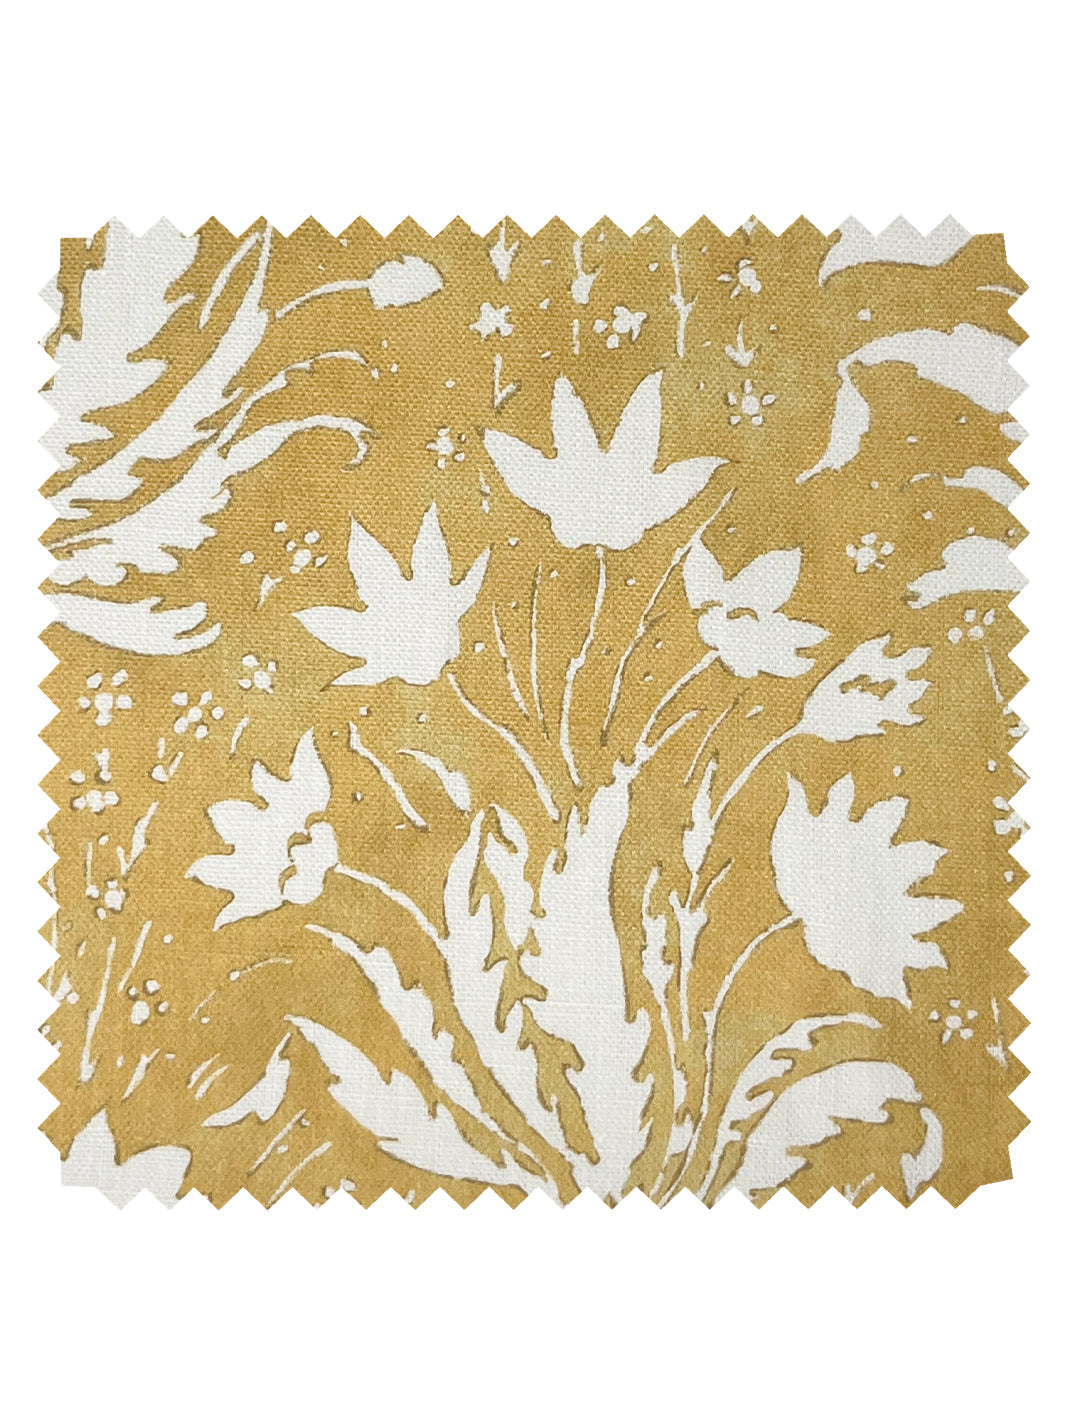 'Hillhouse Floral One Color' Linen Fabric by Nathan Turner - Gold